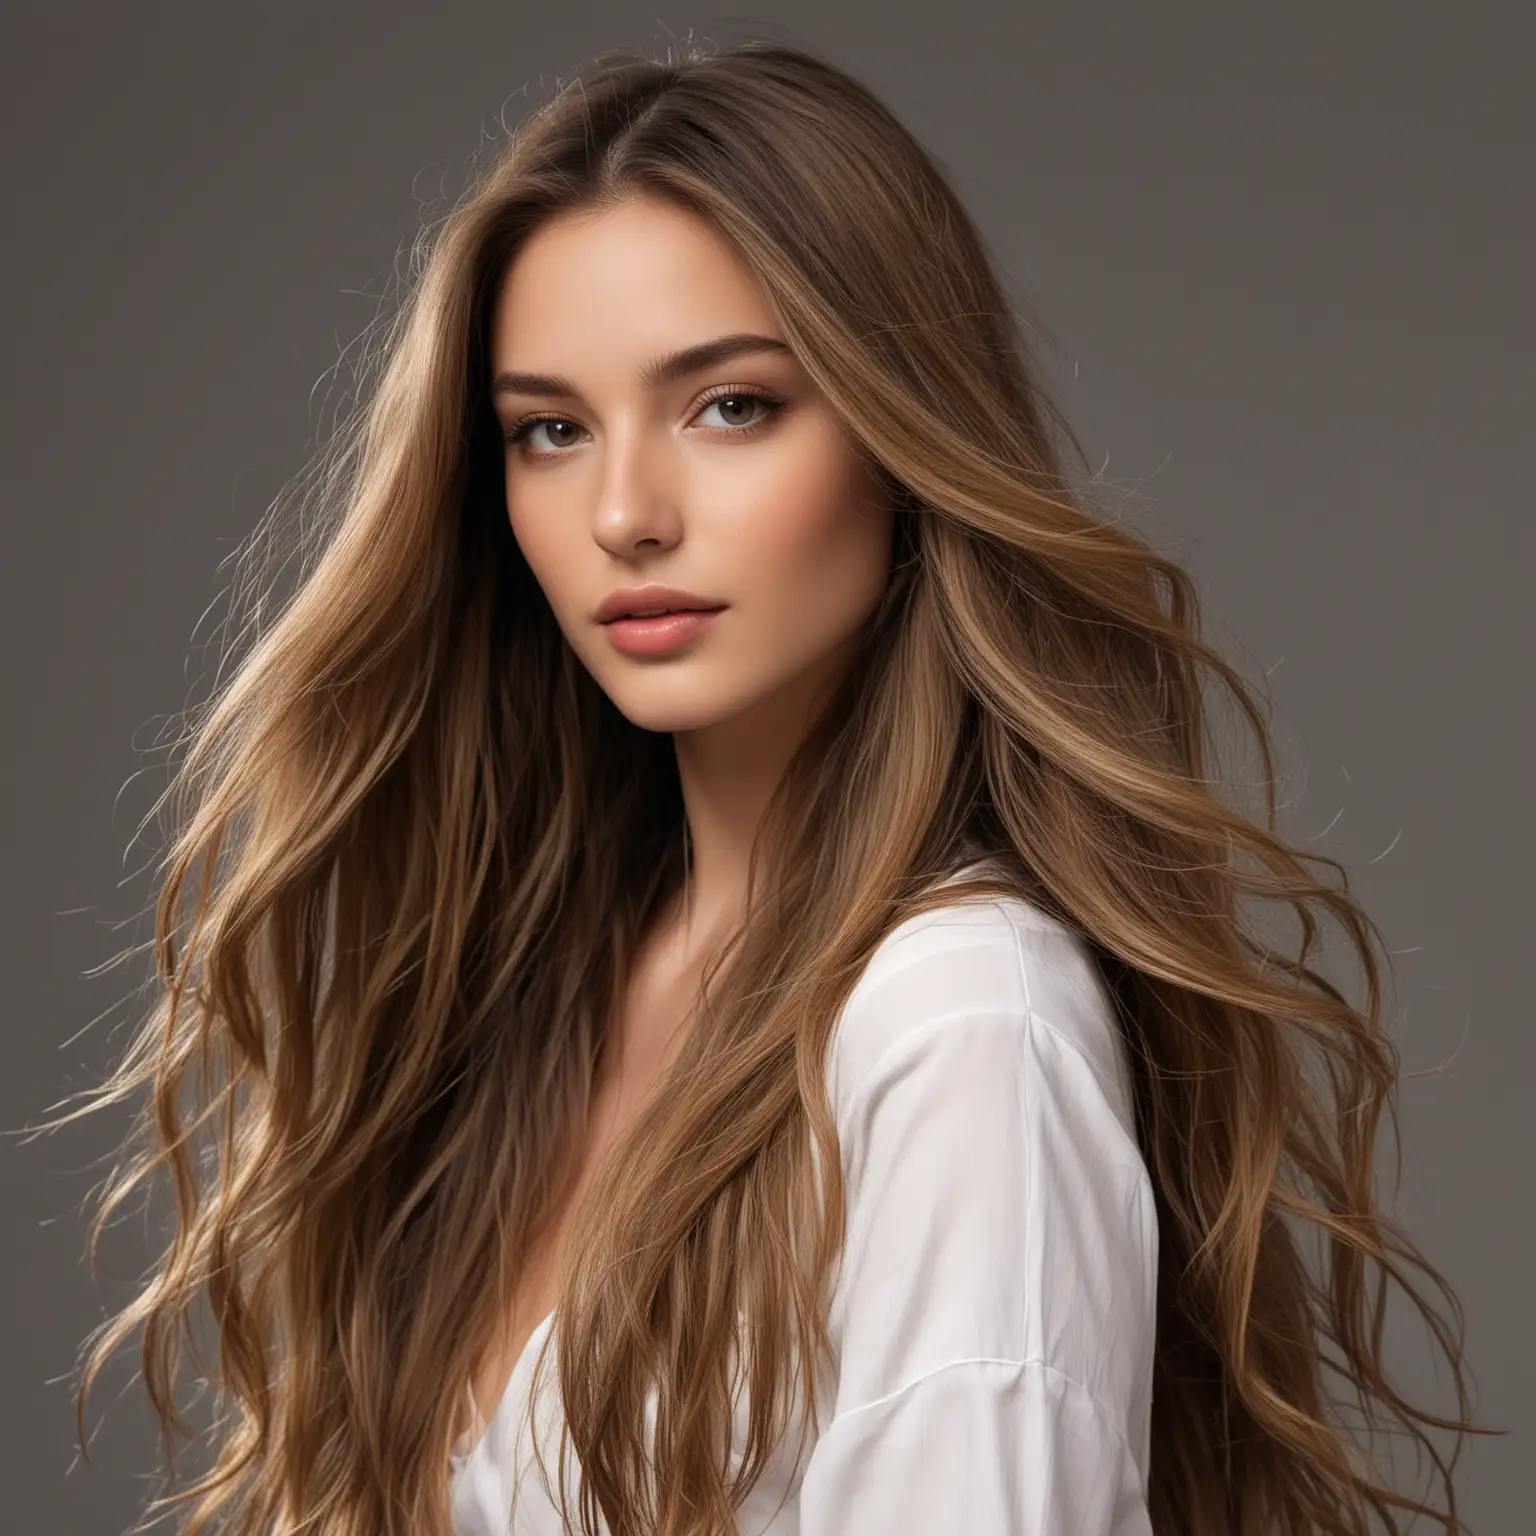 Brunette Model with Spectacular Long Balayage Hair for AI Models Magazine